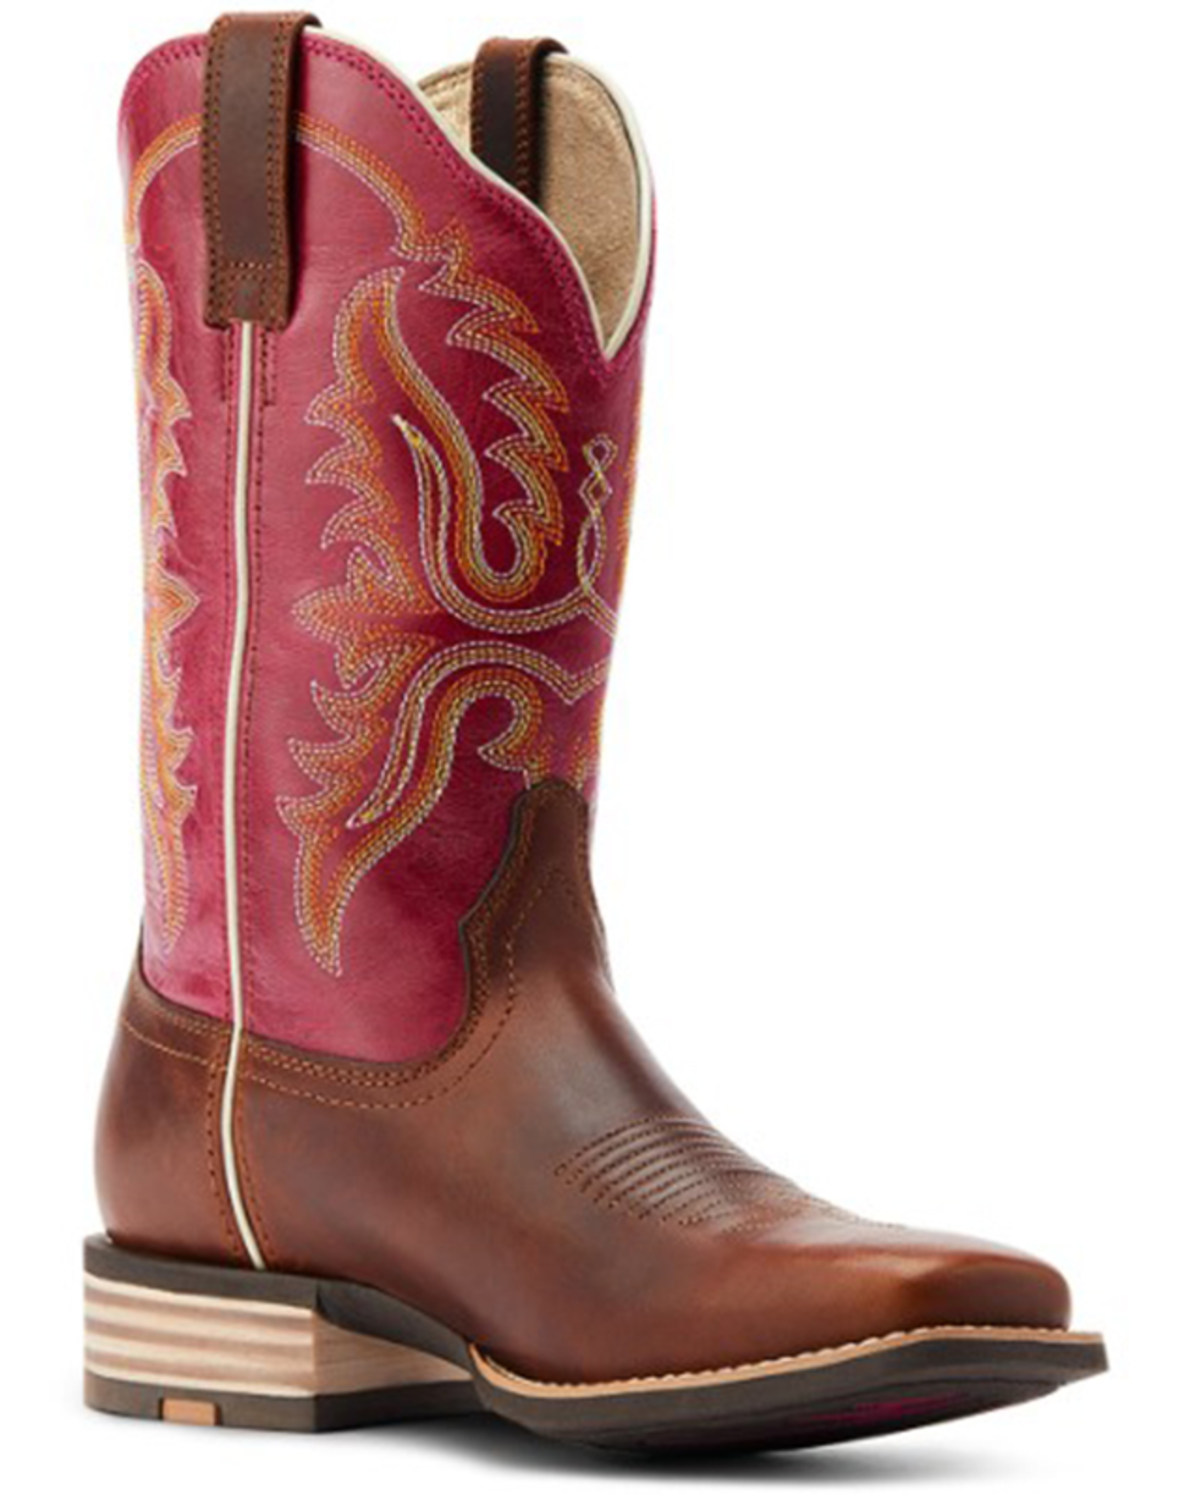 Ariat Women's Olena Western Boots - Broad Square Toe